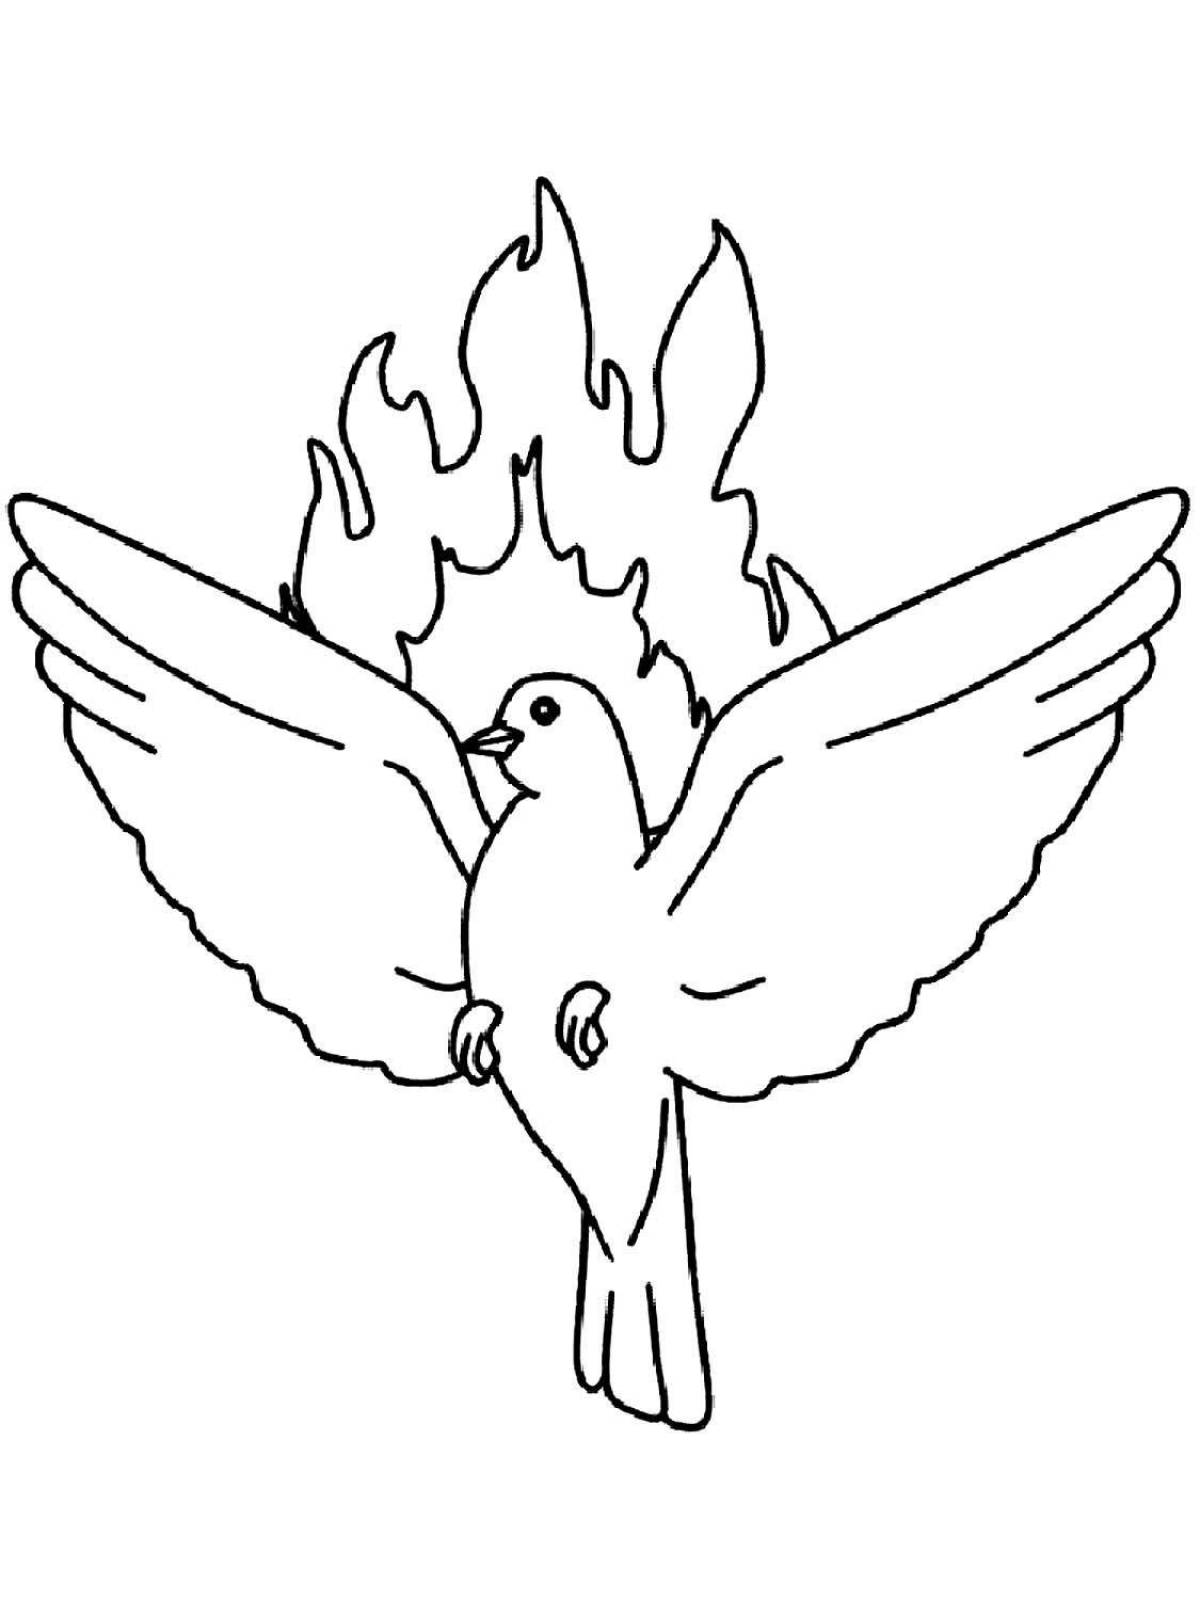 Rampant peace dove coloring book for kids